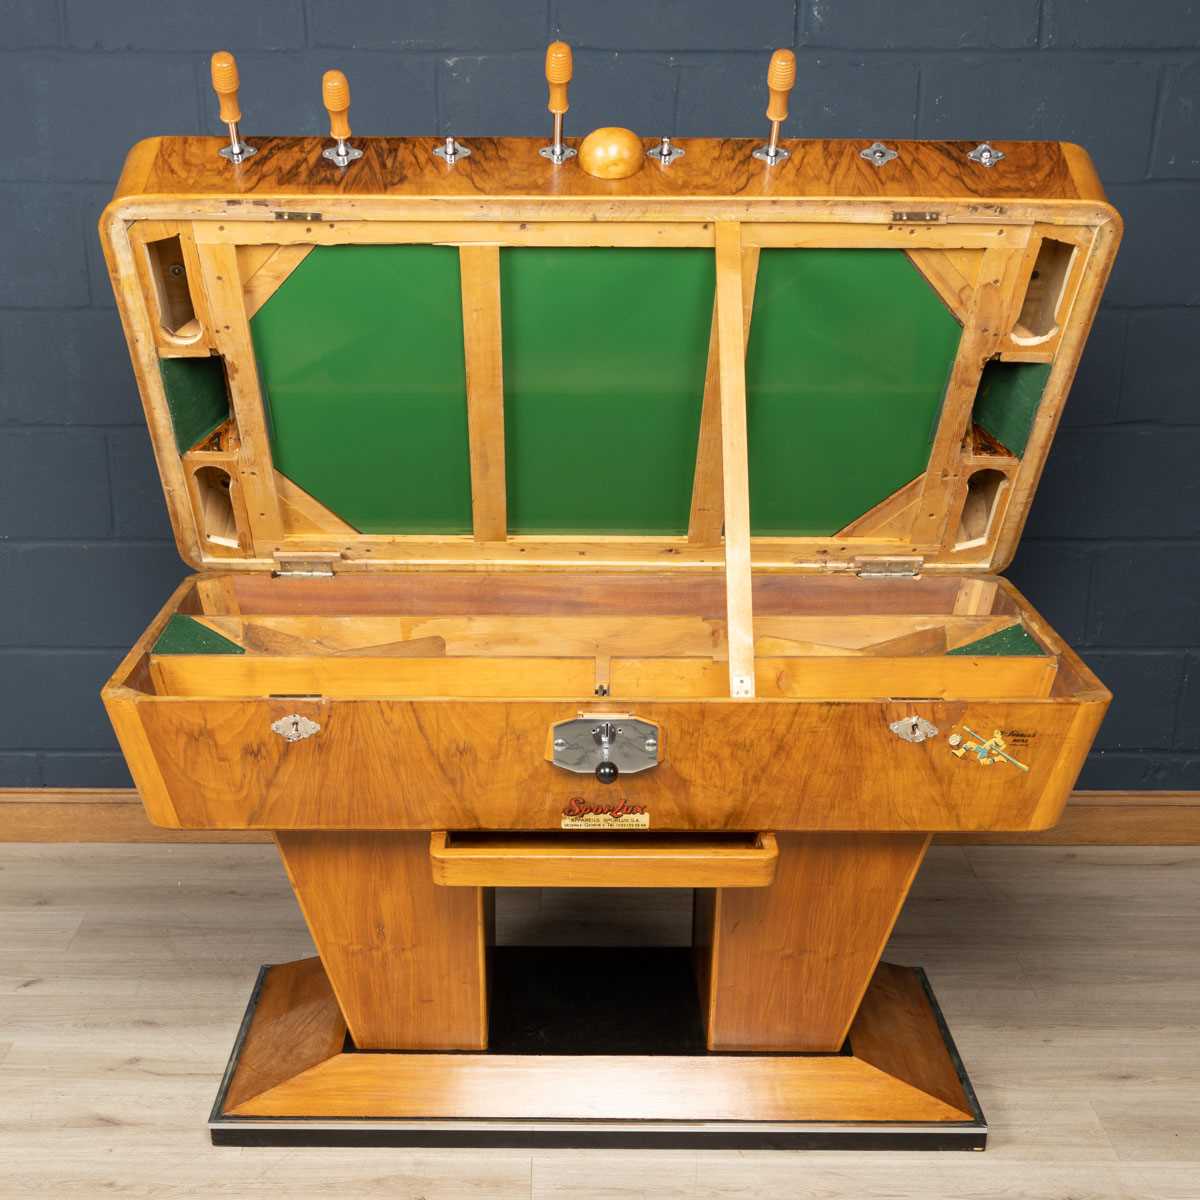 A MID 20TH CENTURY SWISS ART DECO STYLE FOOTBALL TABLE GAME - Image 28 of 37